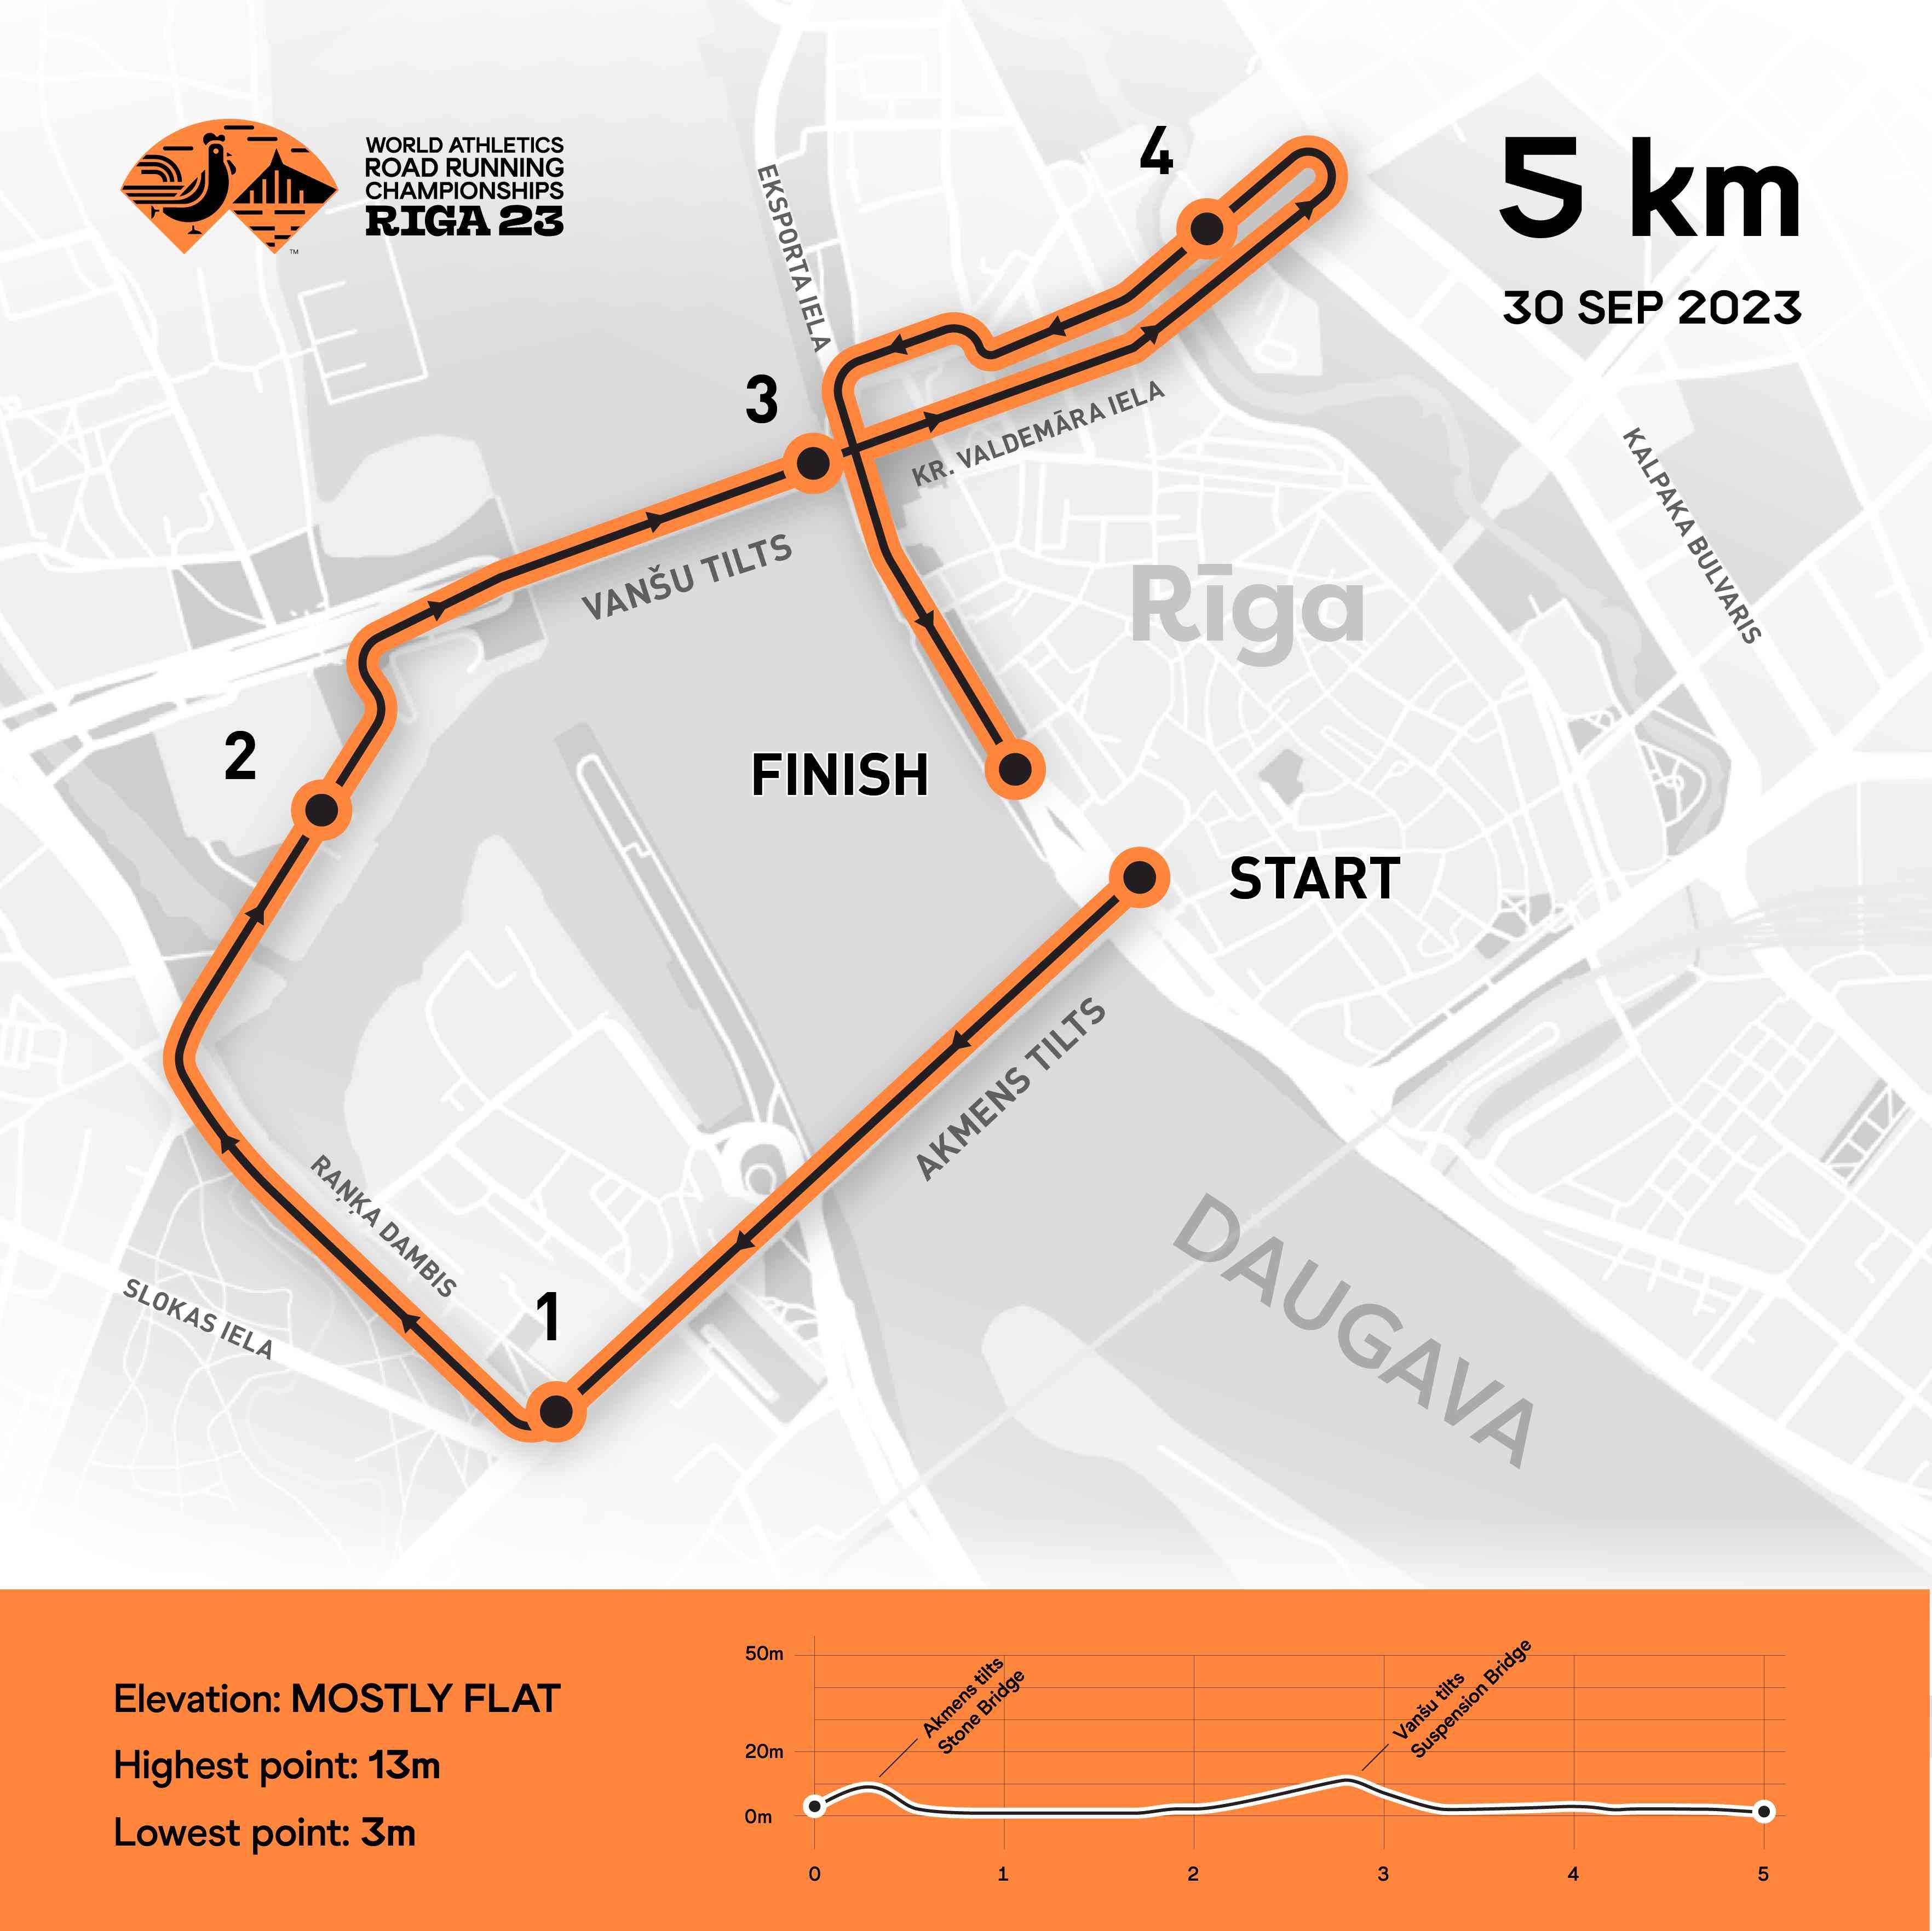 5 km Course Map of the World Road Running Championships Riga23